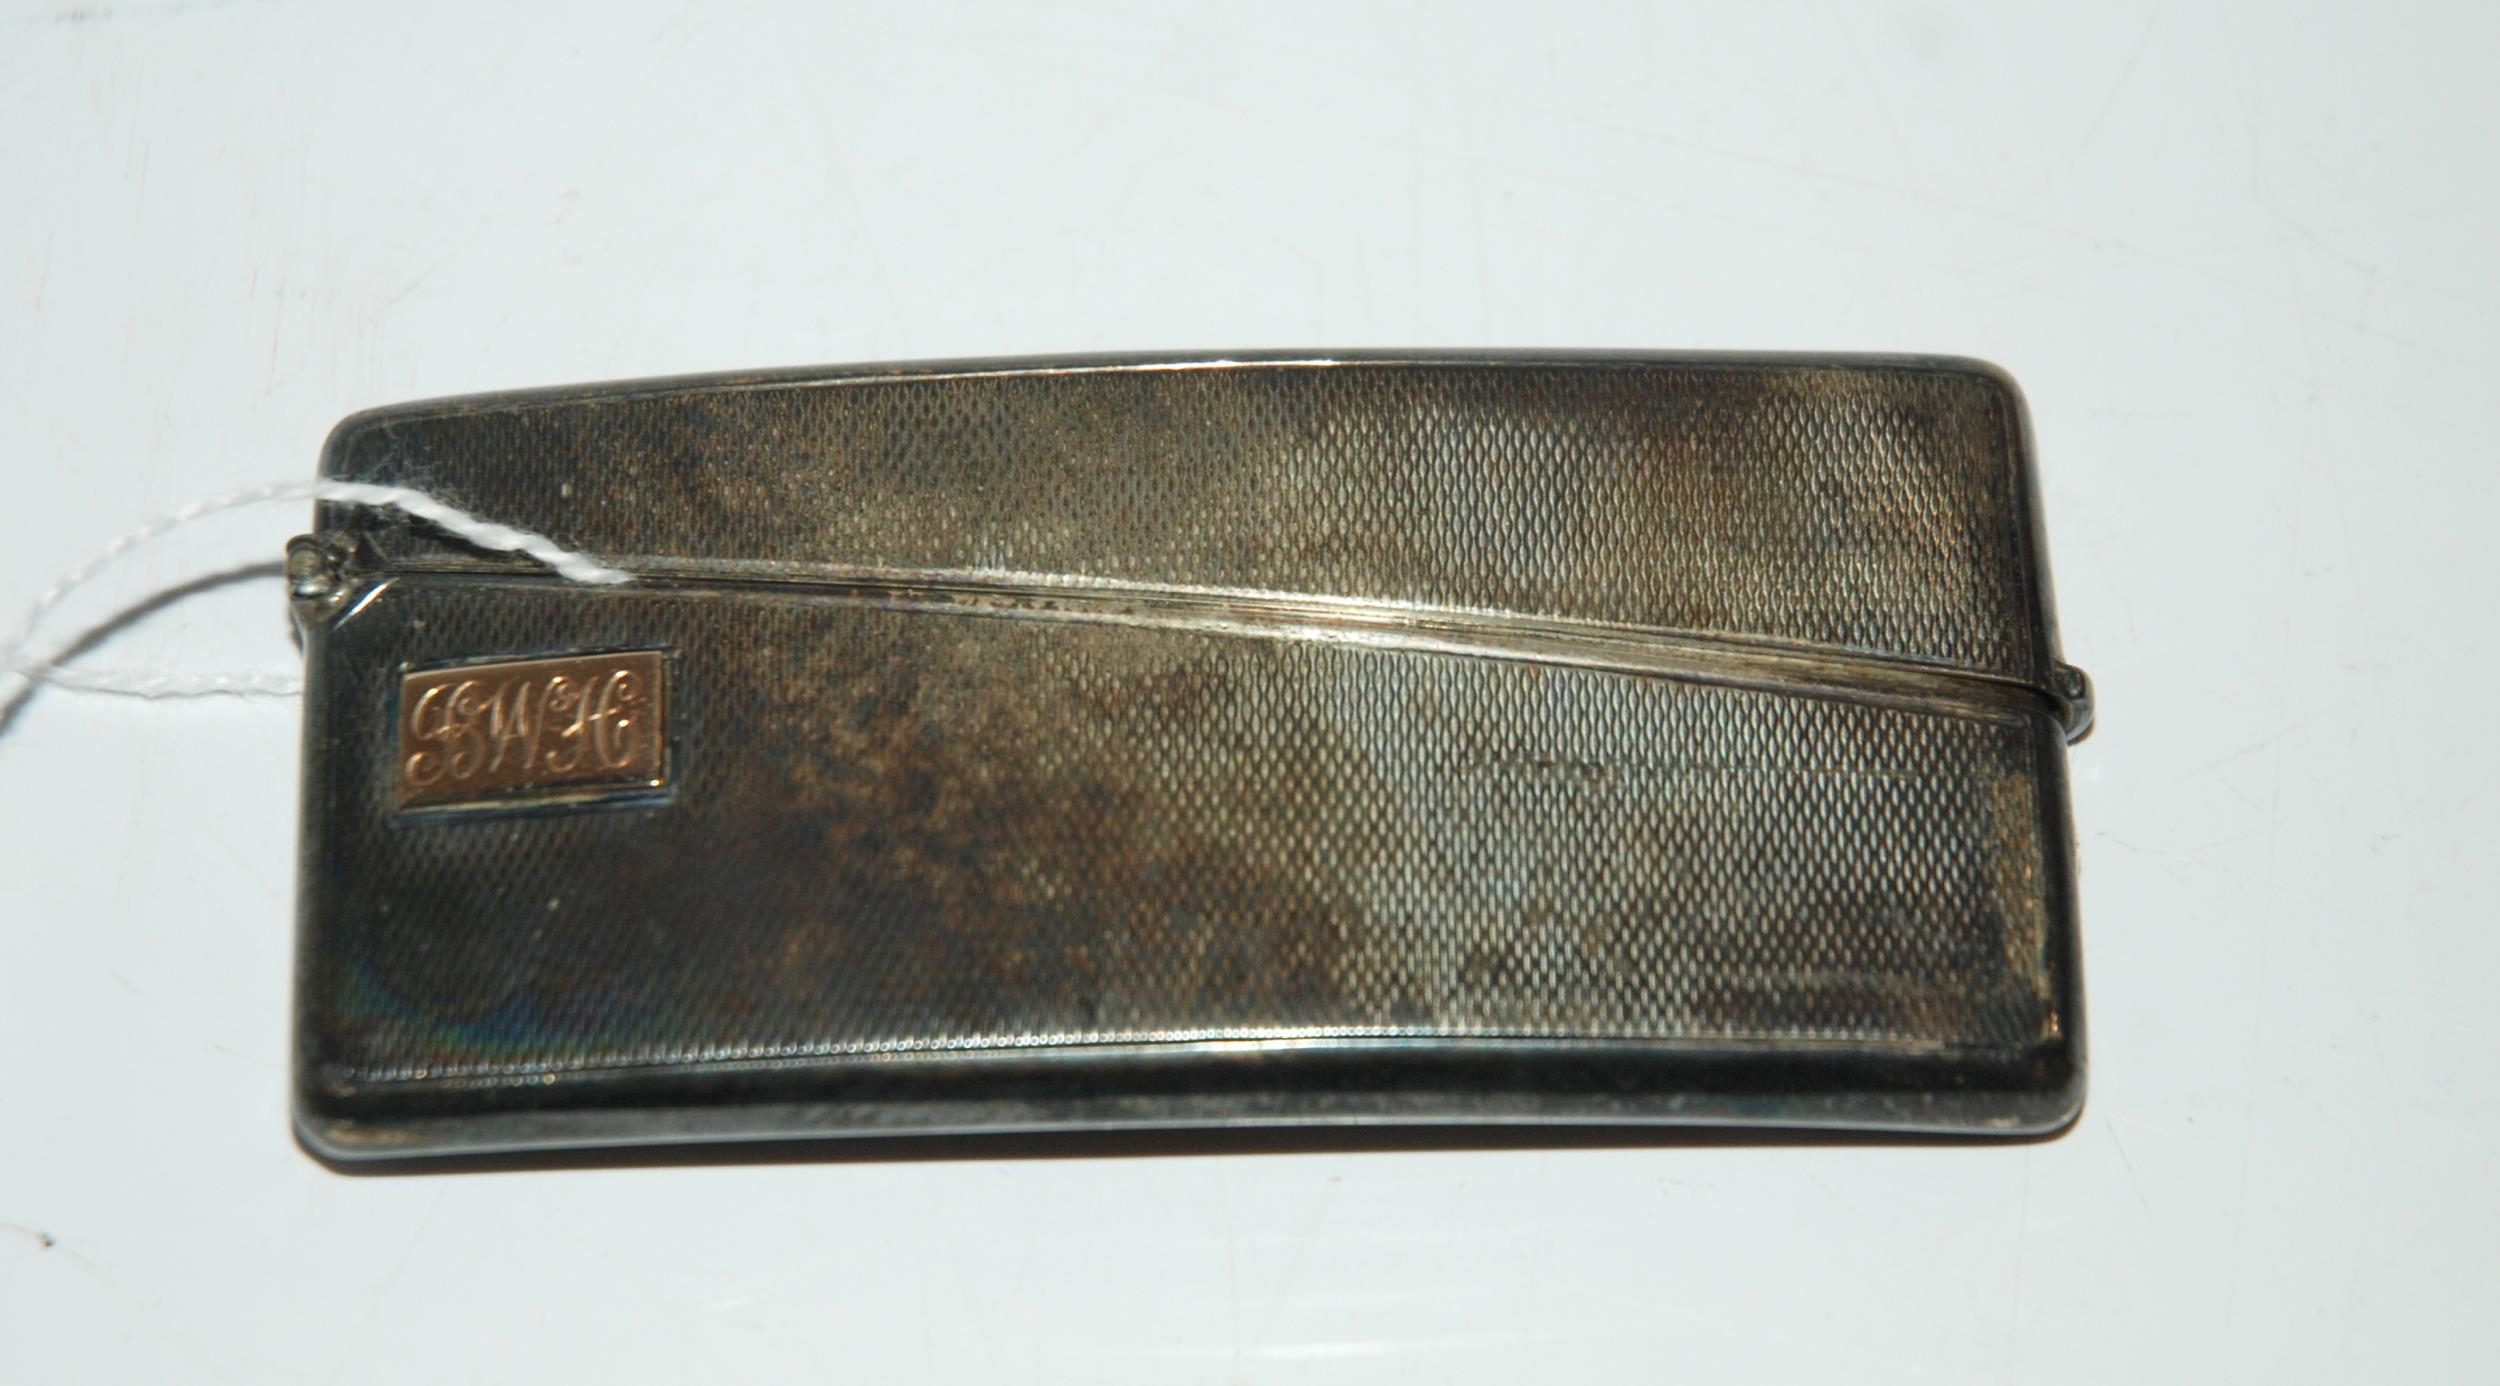 A silver card case London 1935 rectangular curved body with engine turned decoration monogrammed "